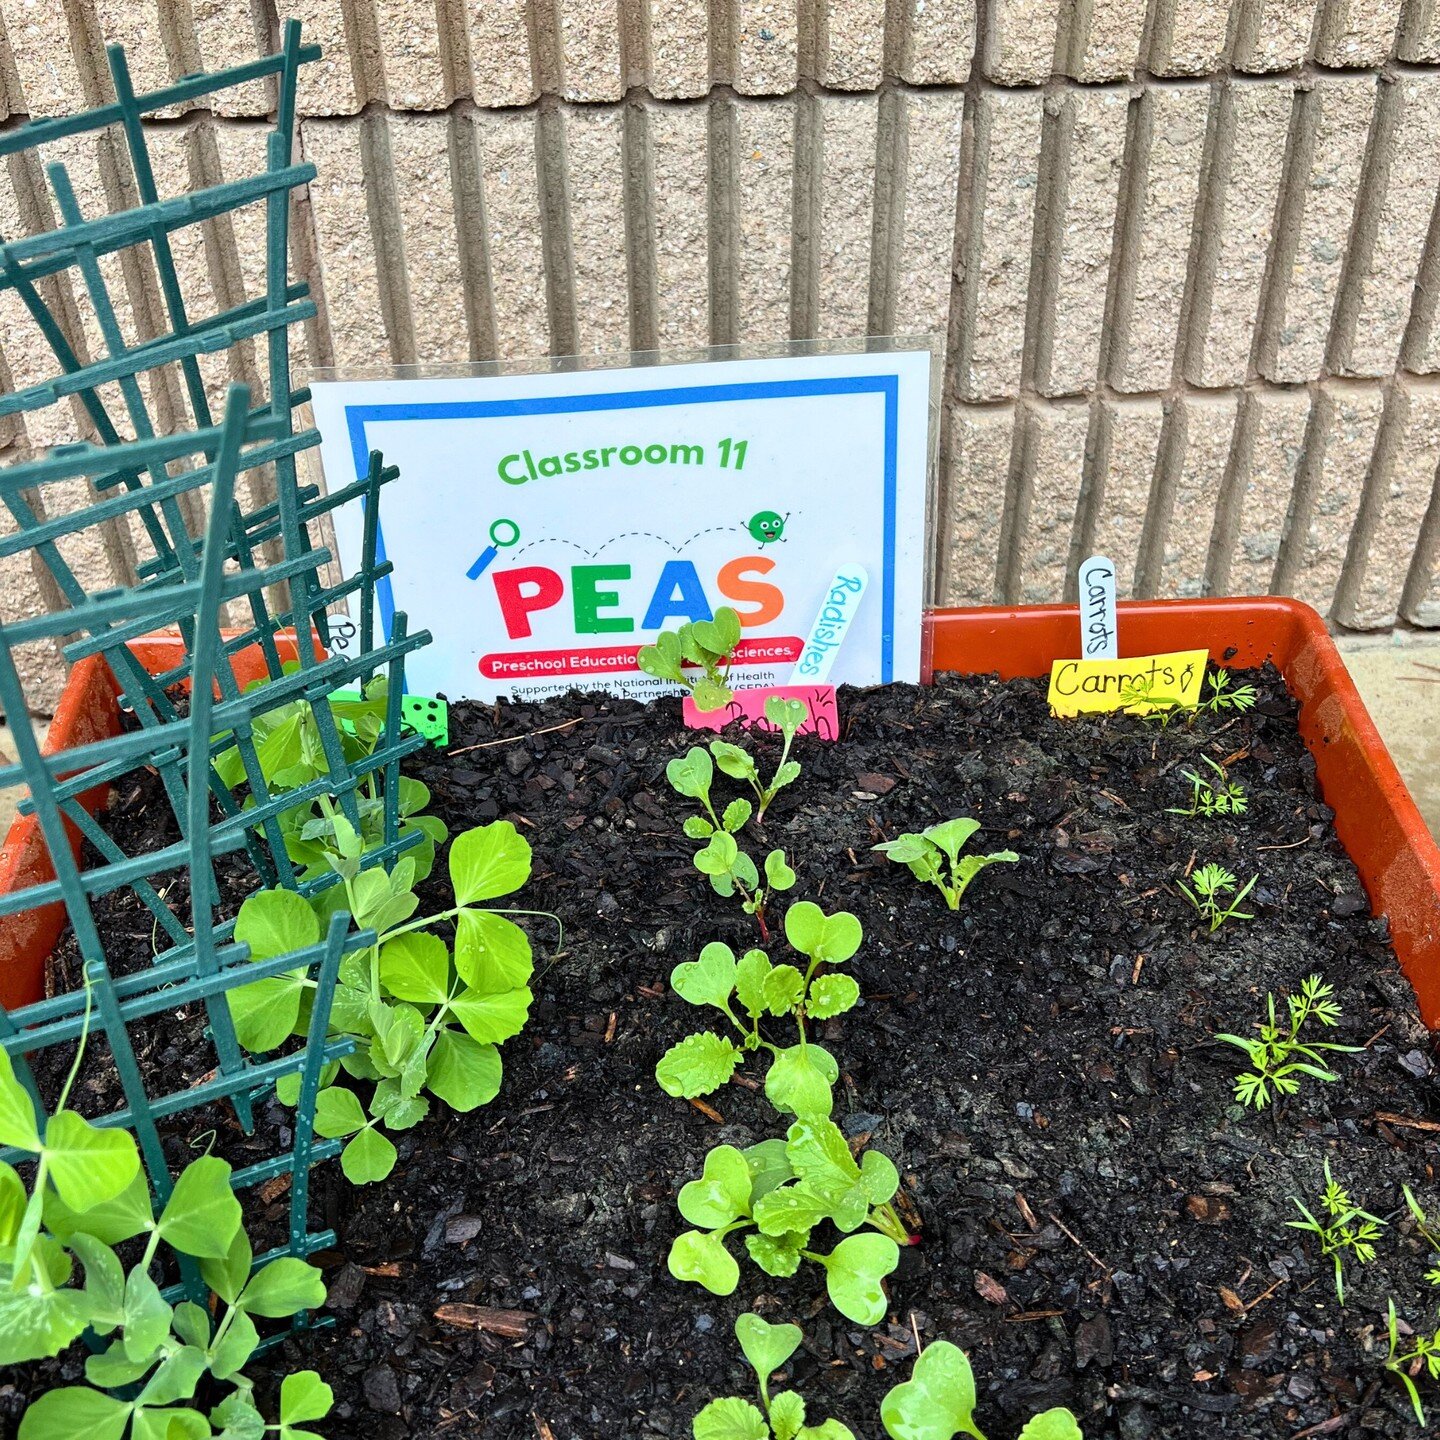 Spring has sprung in our PEAS raised beds! PEAS classrooms have been busy growing their radishes, peas, and carrots with our PEAS gardener, Libby. Can you tell which vegetable plants are which? 
#morepeasplease #thefeedlab #nigms #nihsepa #EarlyChild